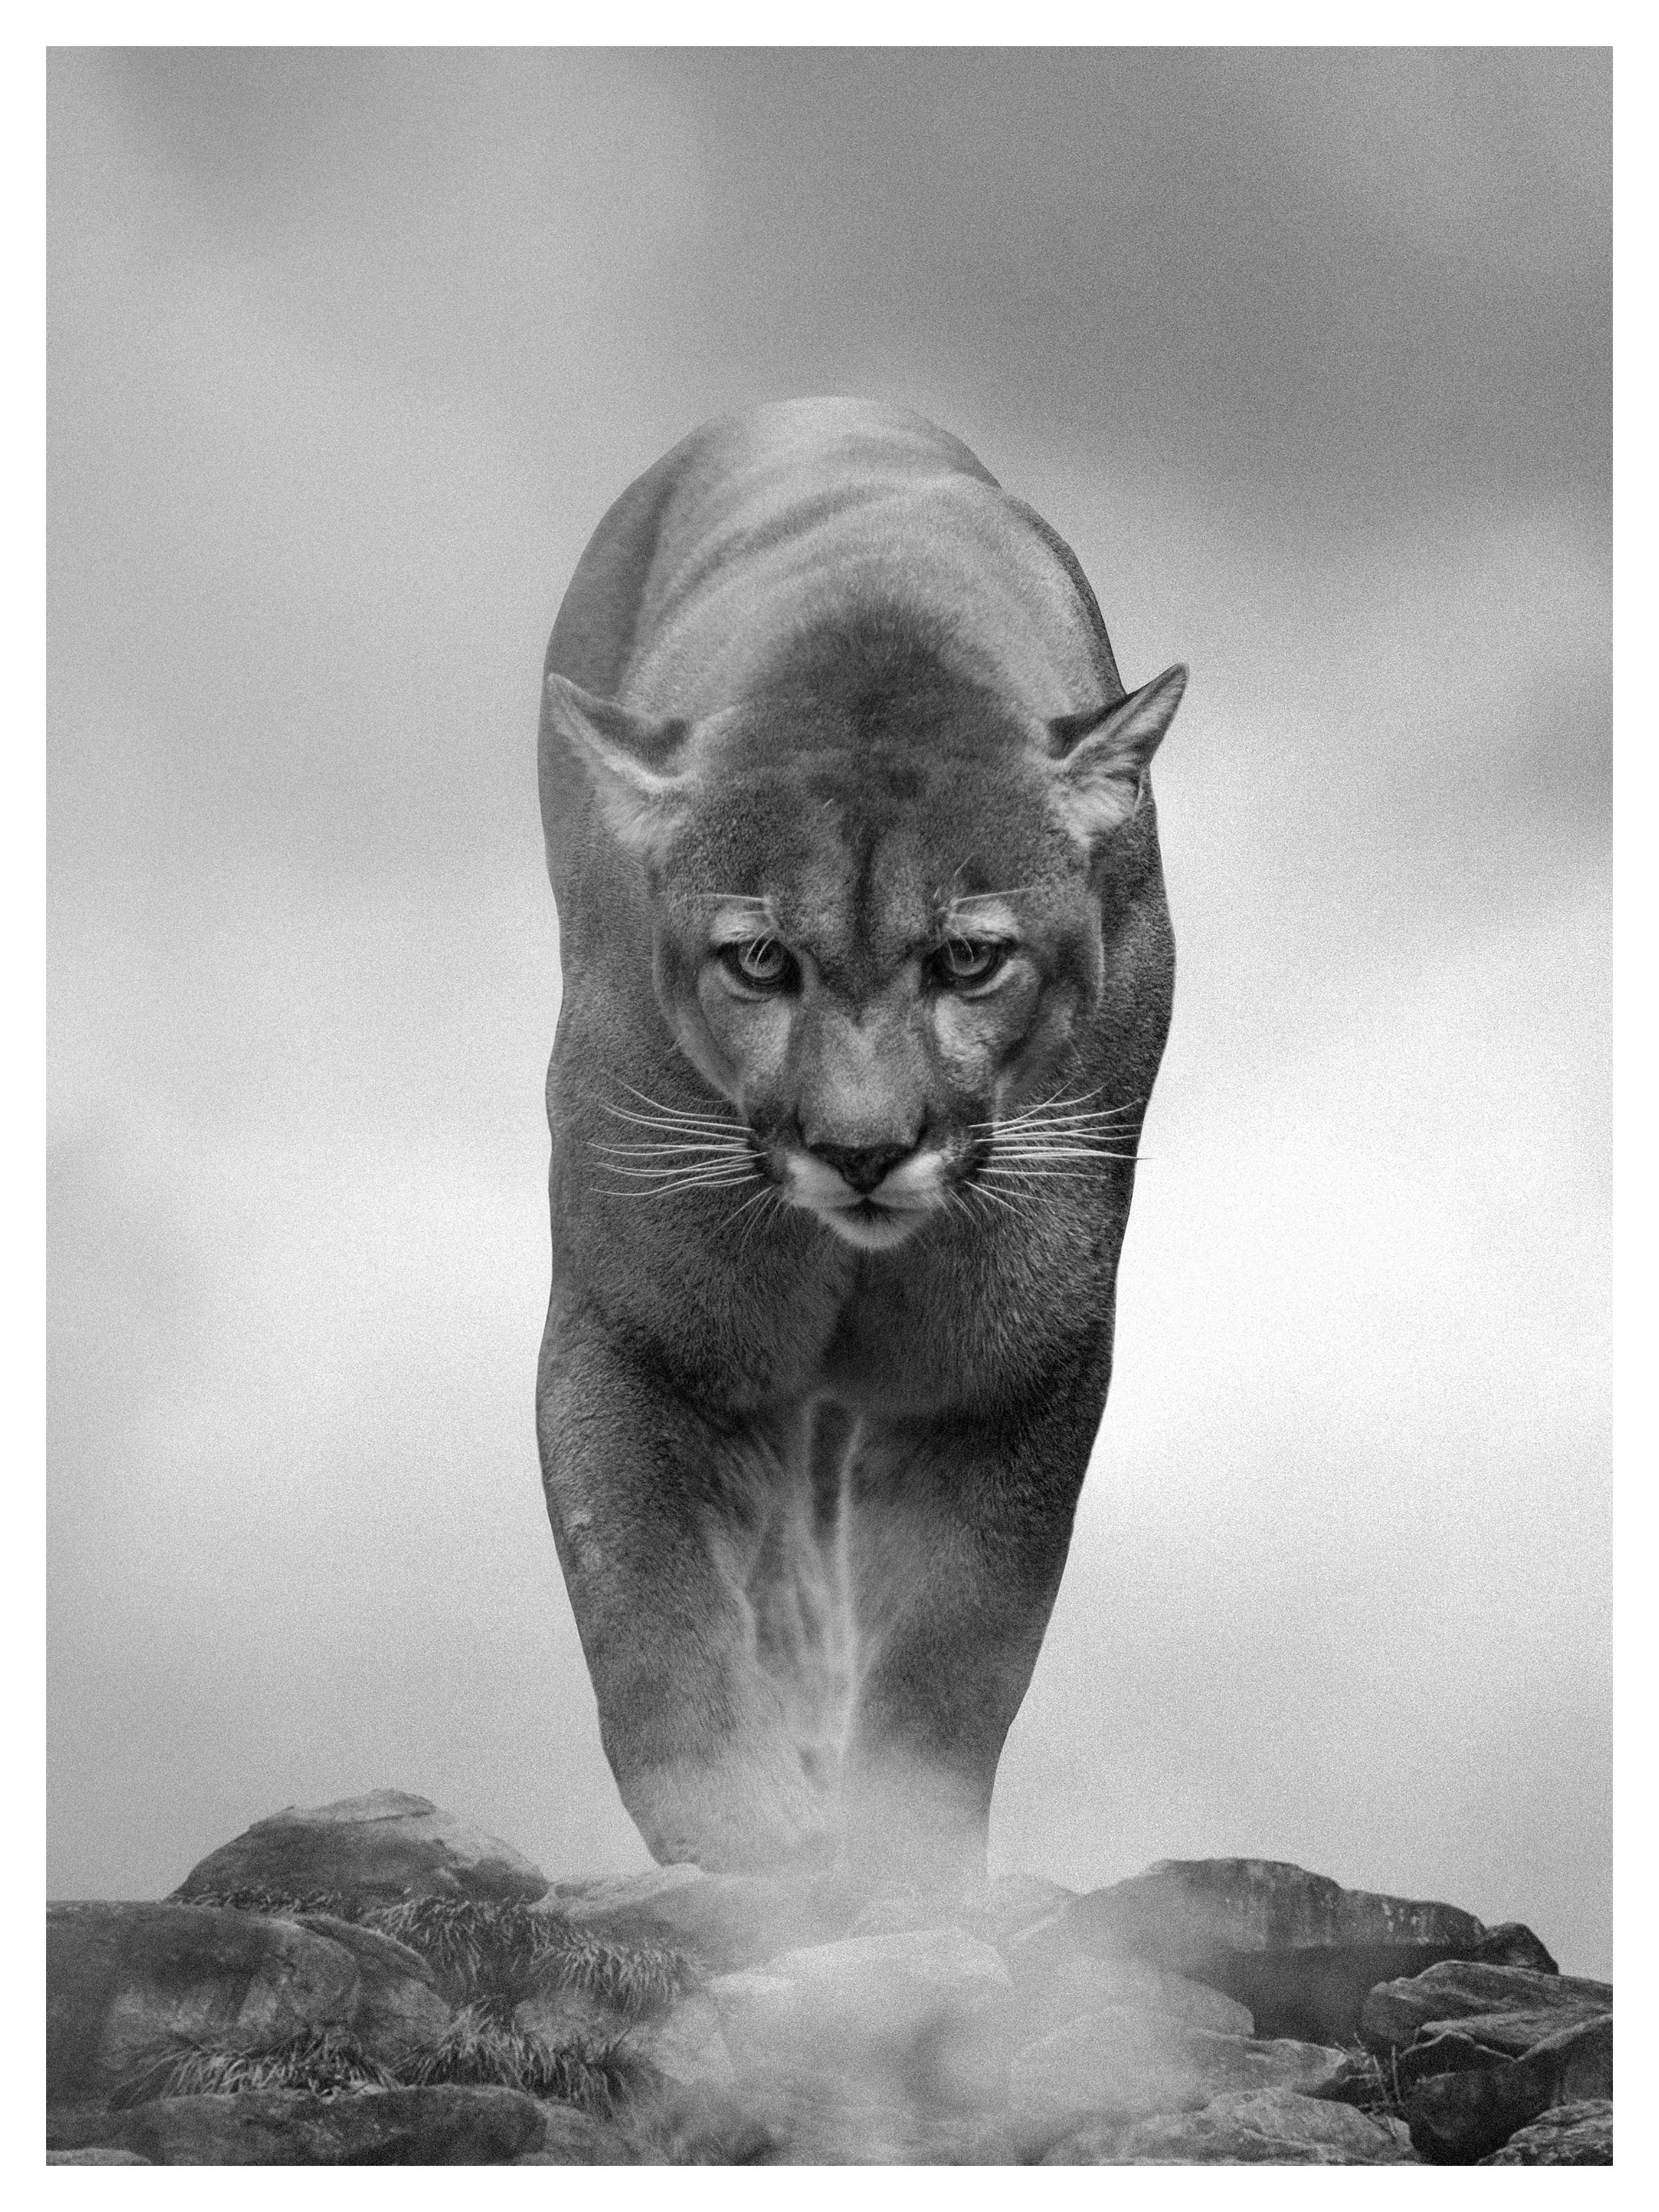 Shane Russeck Landscape Photograph - King of the Mountain 20x30 Black and White Photography, Cougar, Mountain Lion